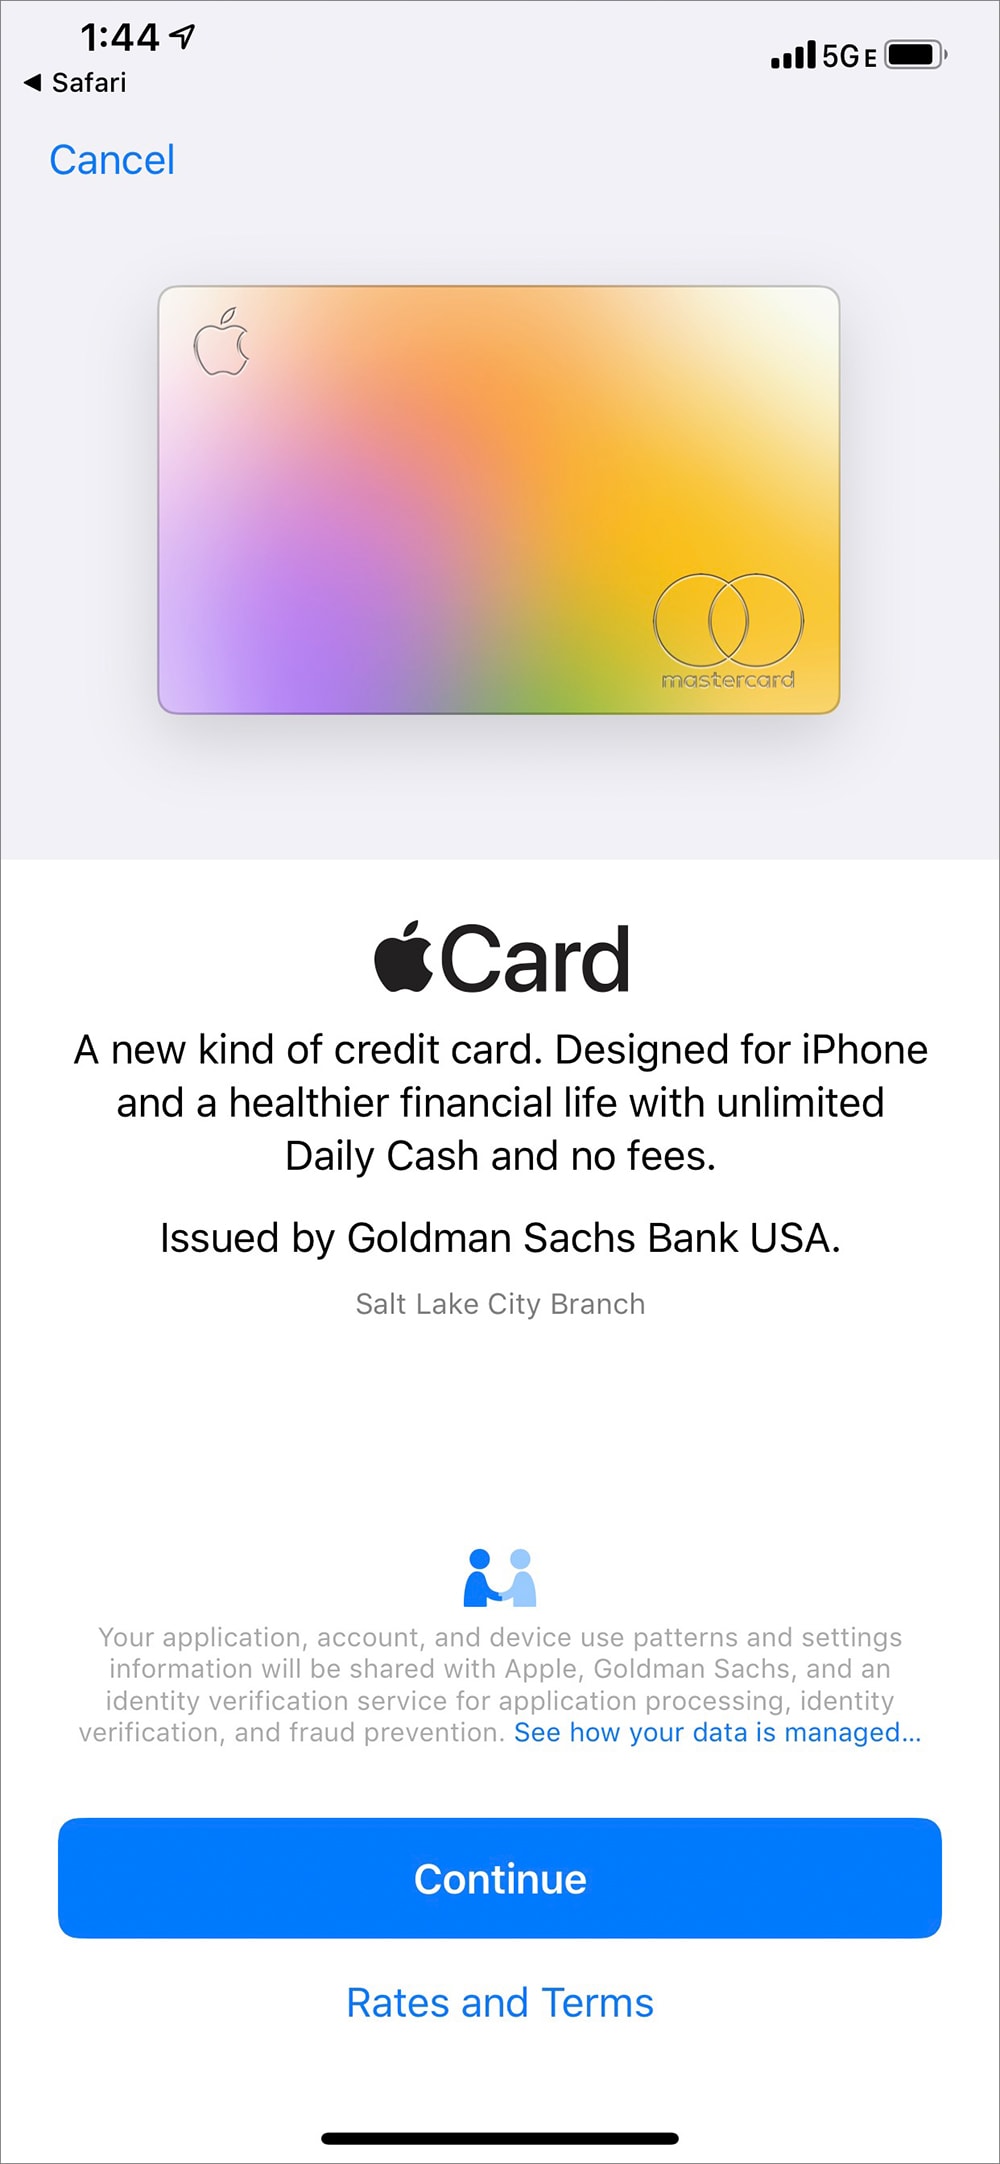 This is Apple Card